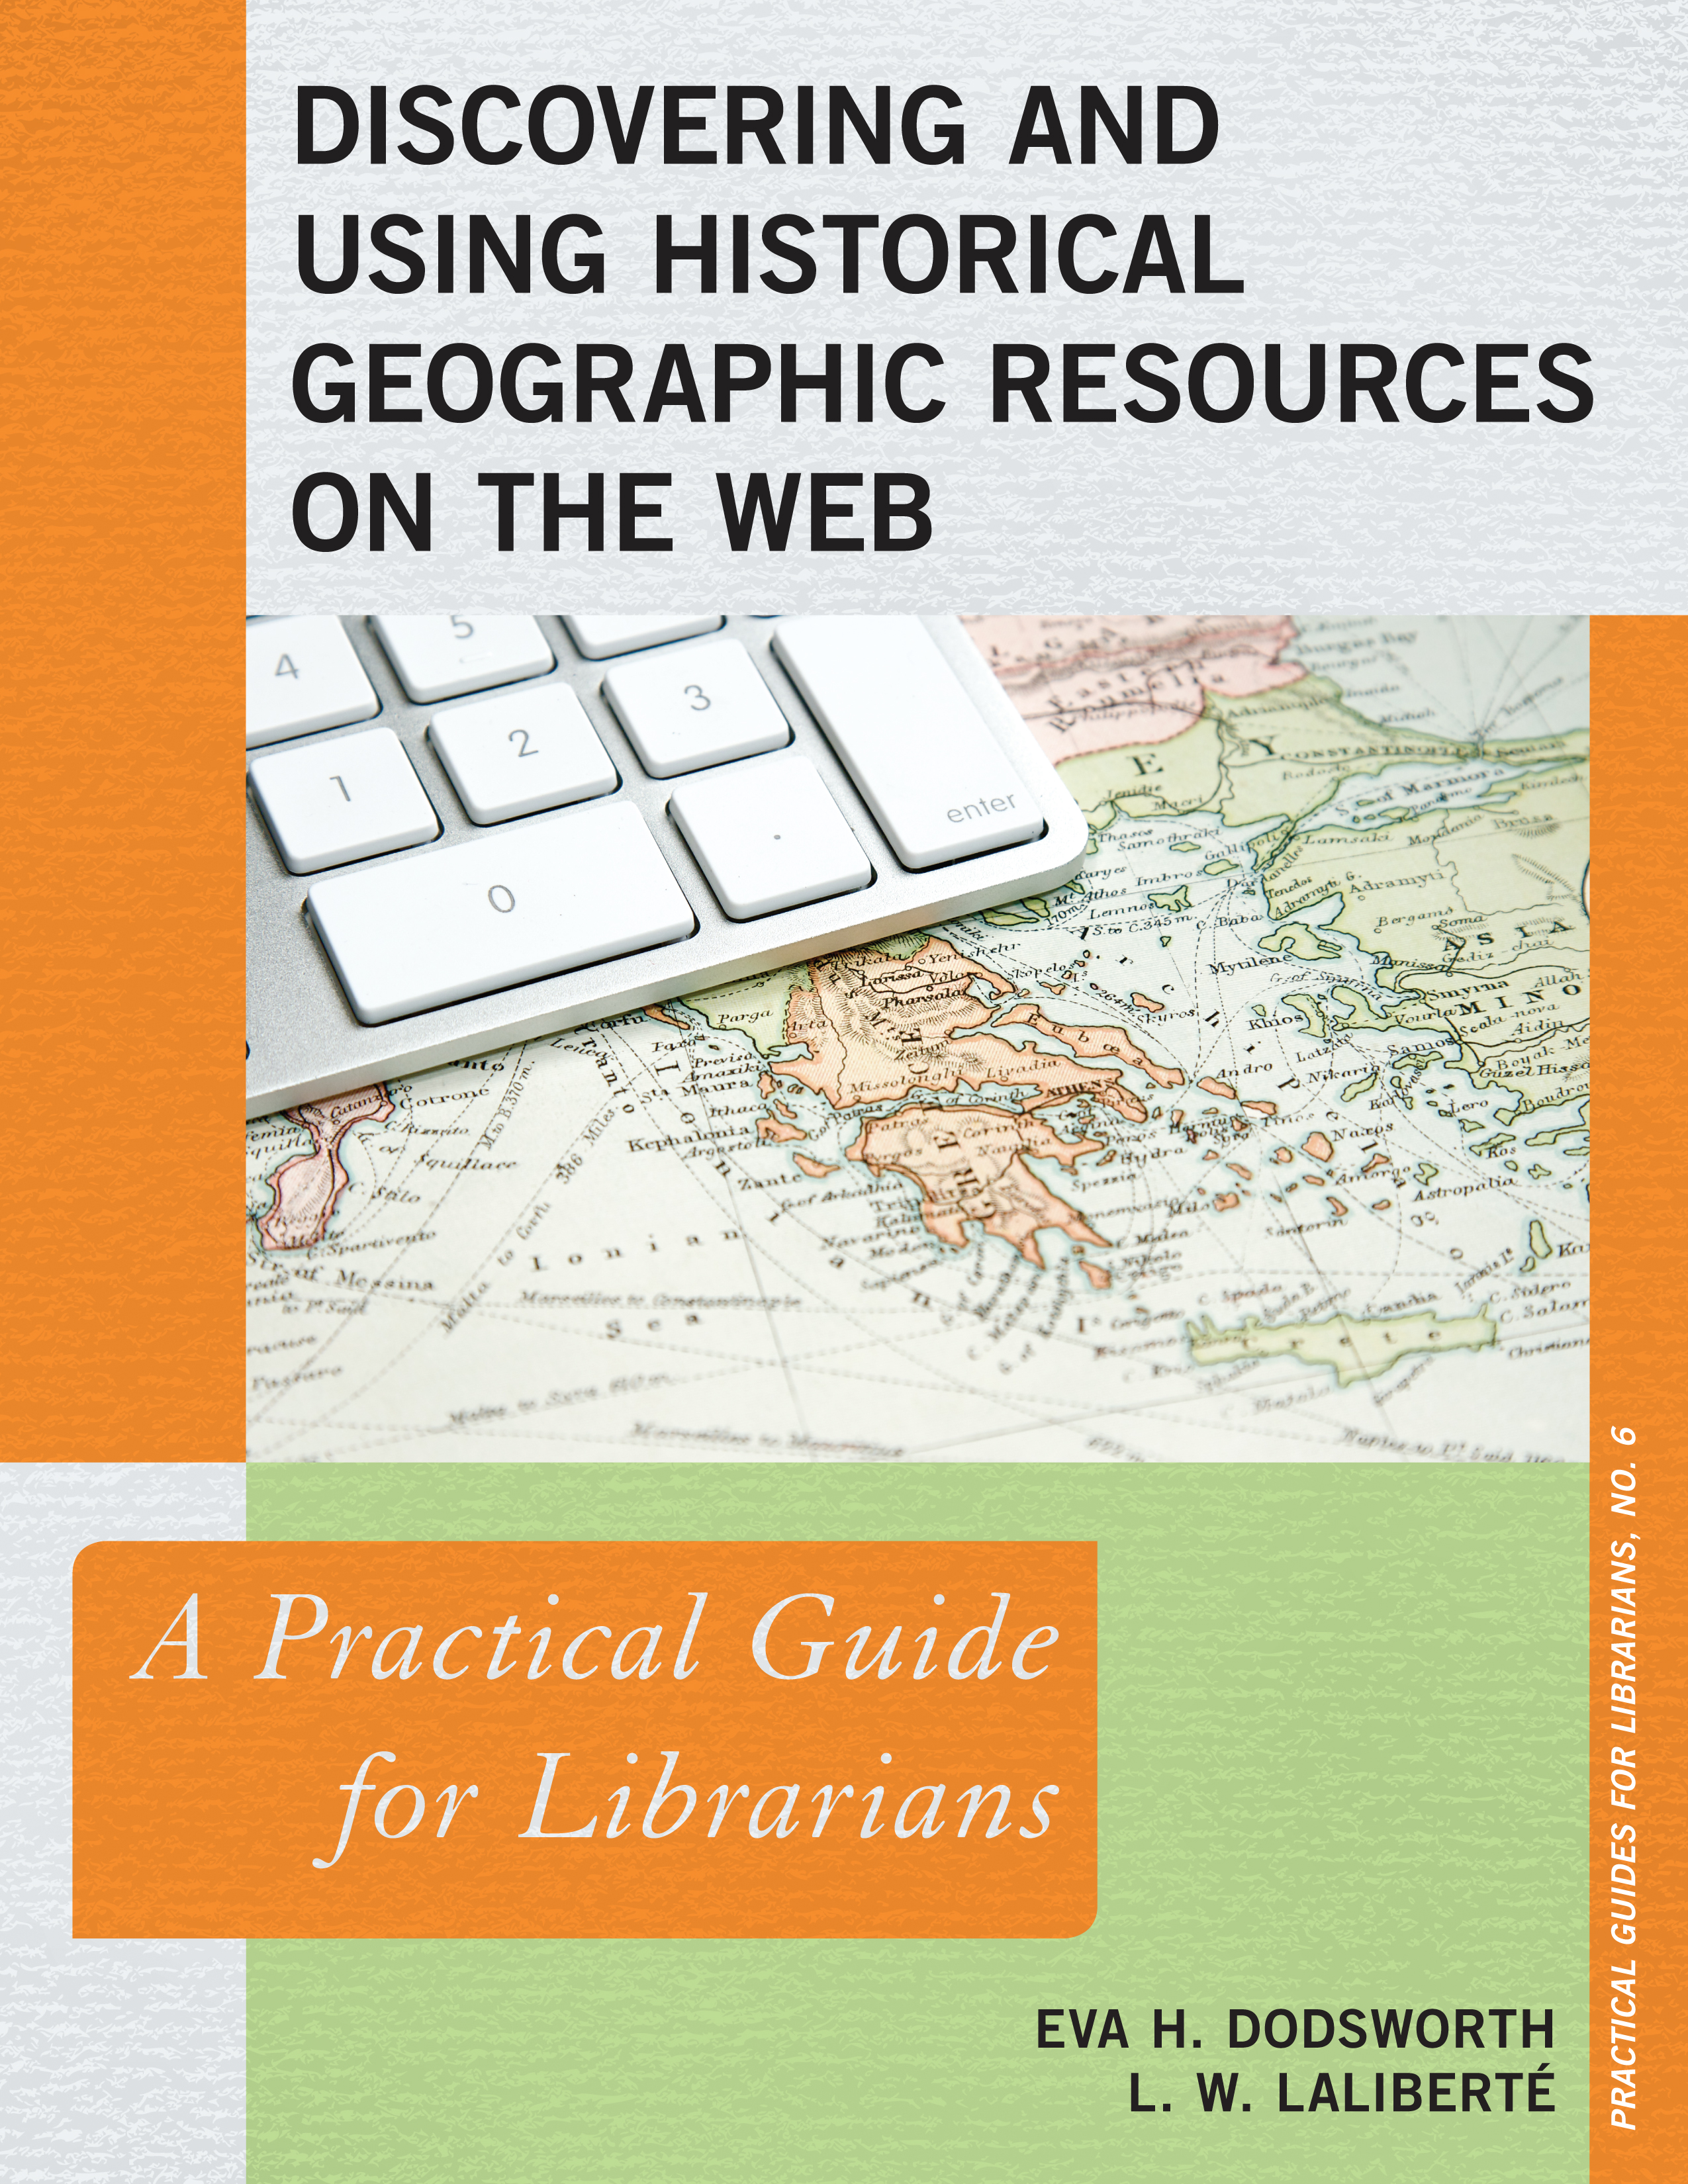 Discovering and Using Historical Geographic Resources on the Web: A Practical Guide for Librarians